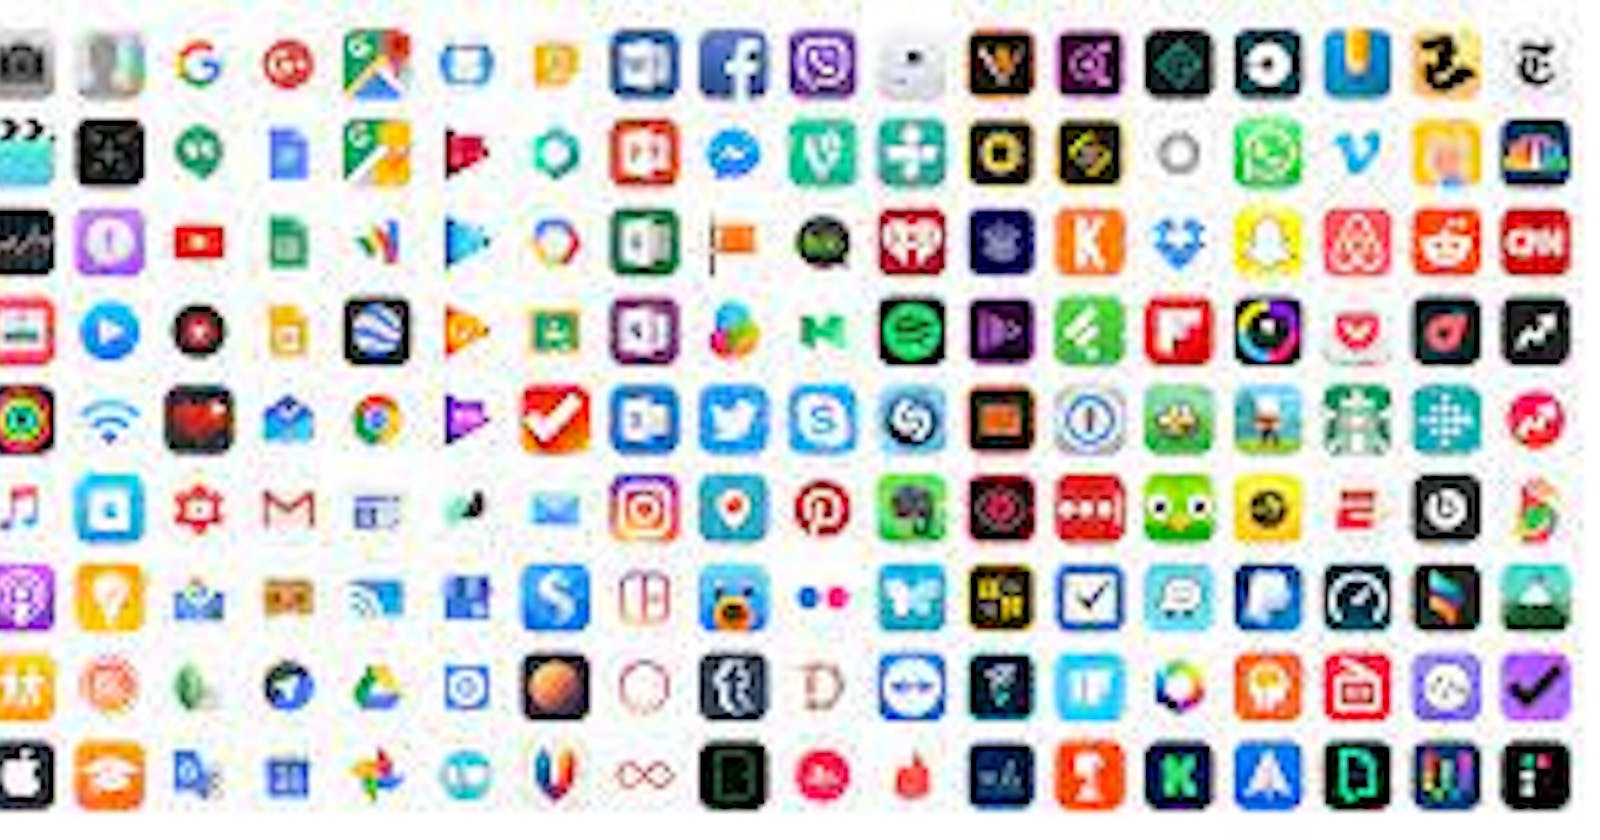 Apps(application)